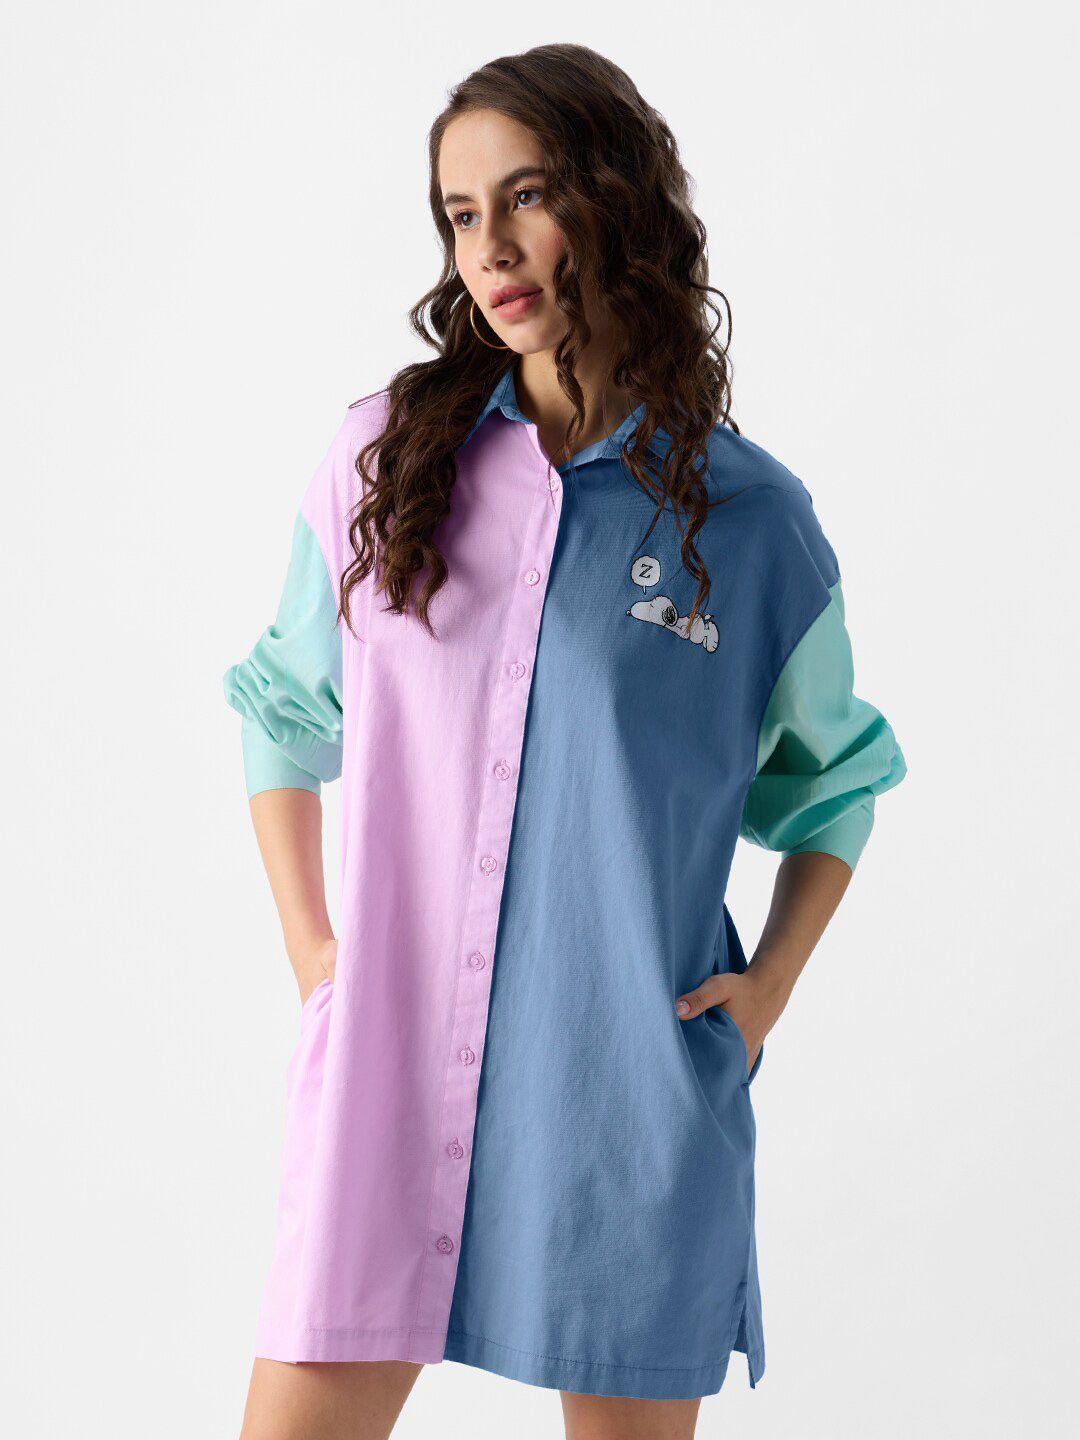 the souled store lavender & blue colourblocked long sleeves pure cotton shirt style dress